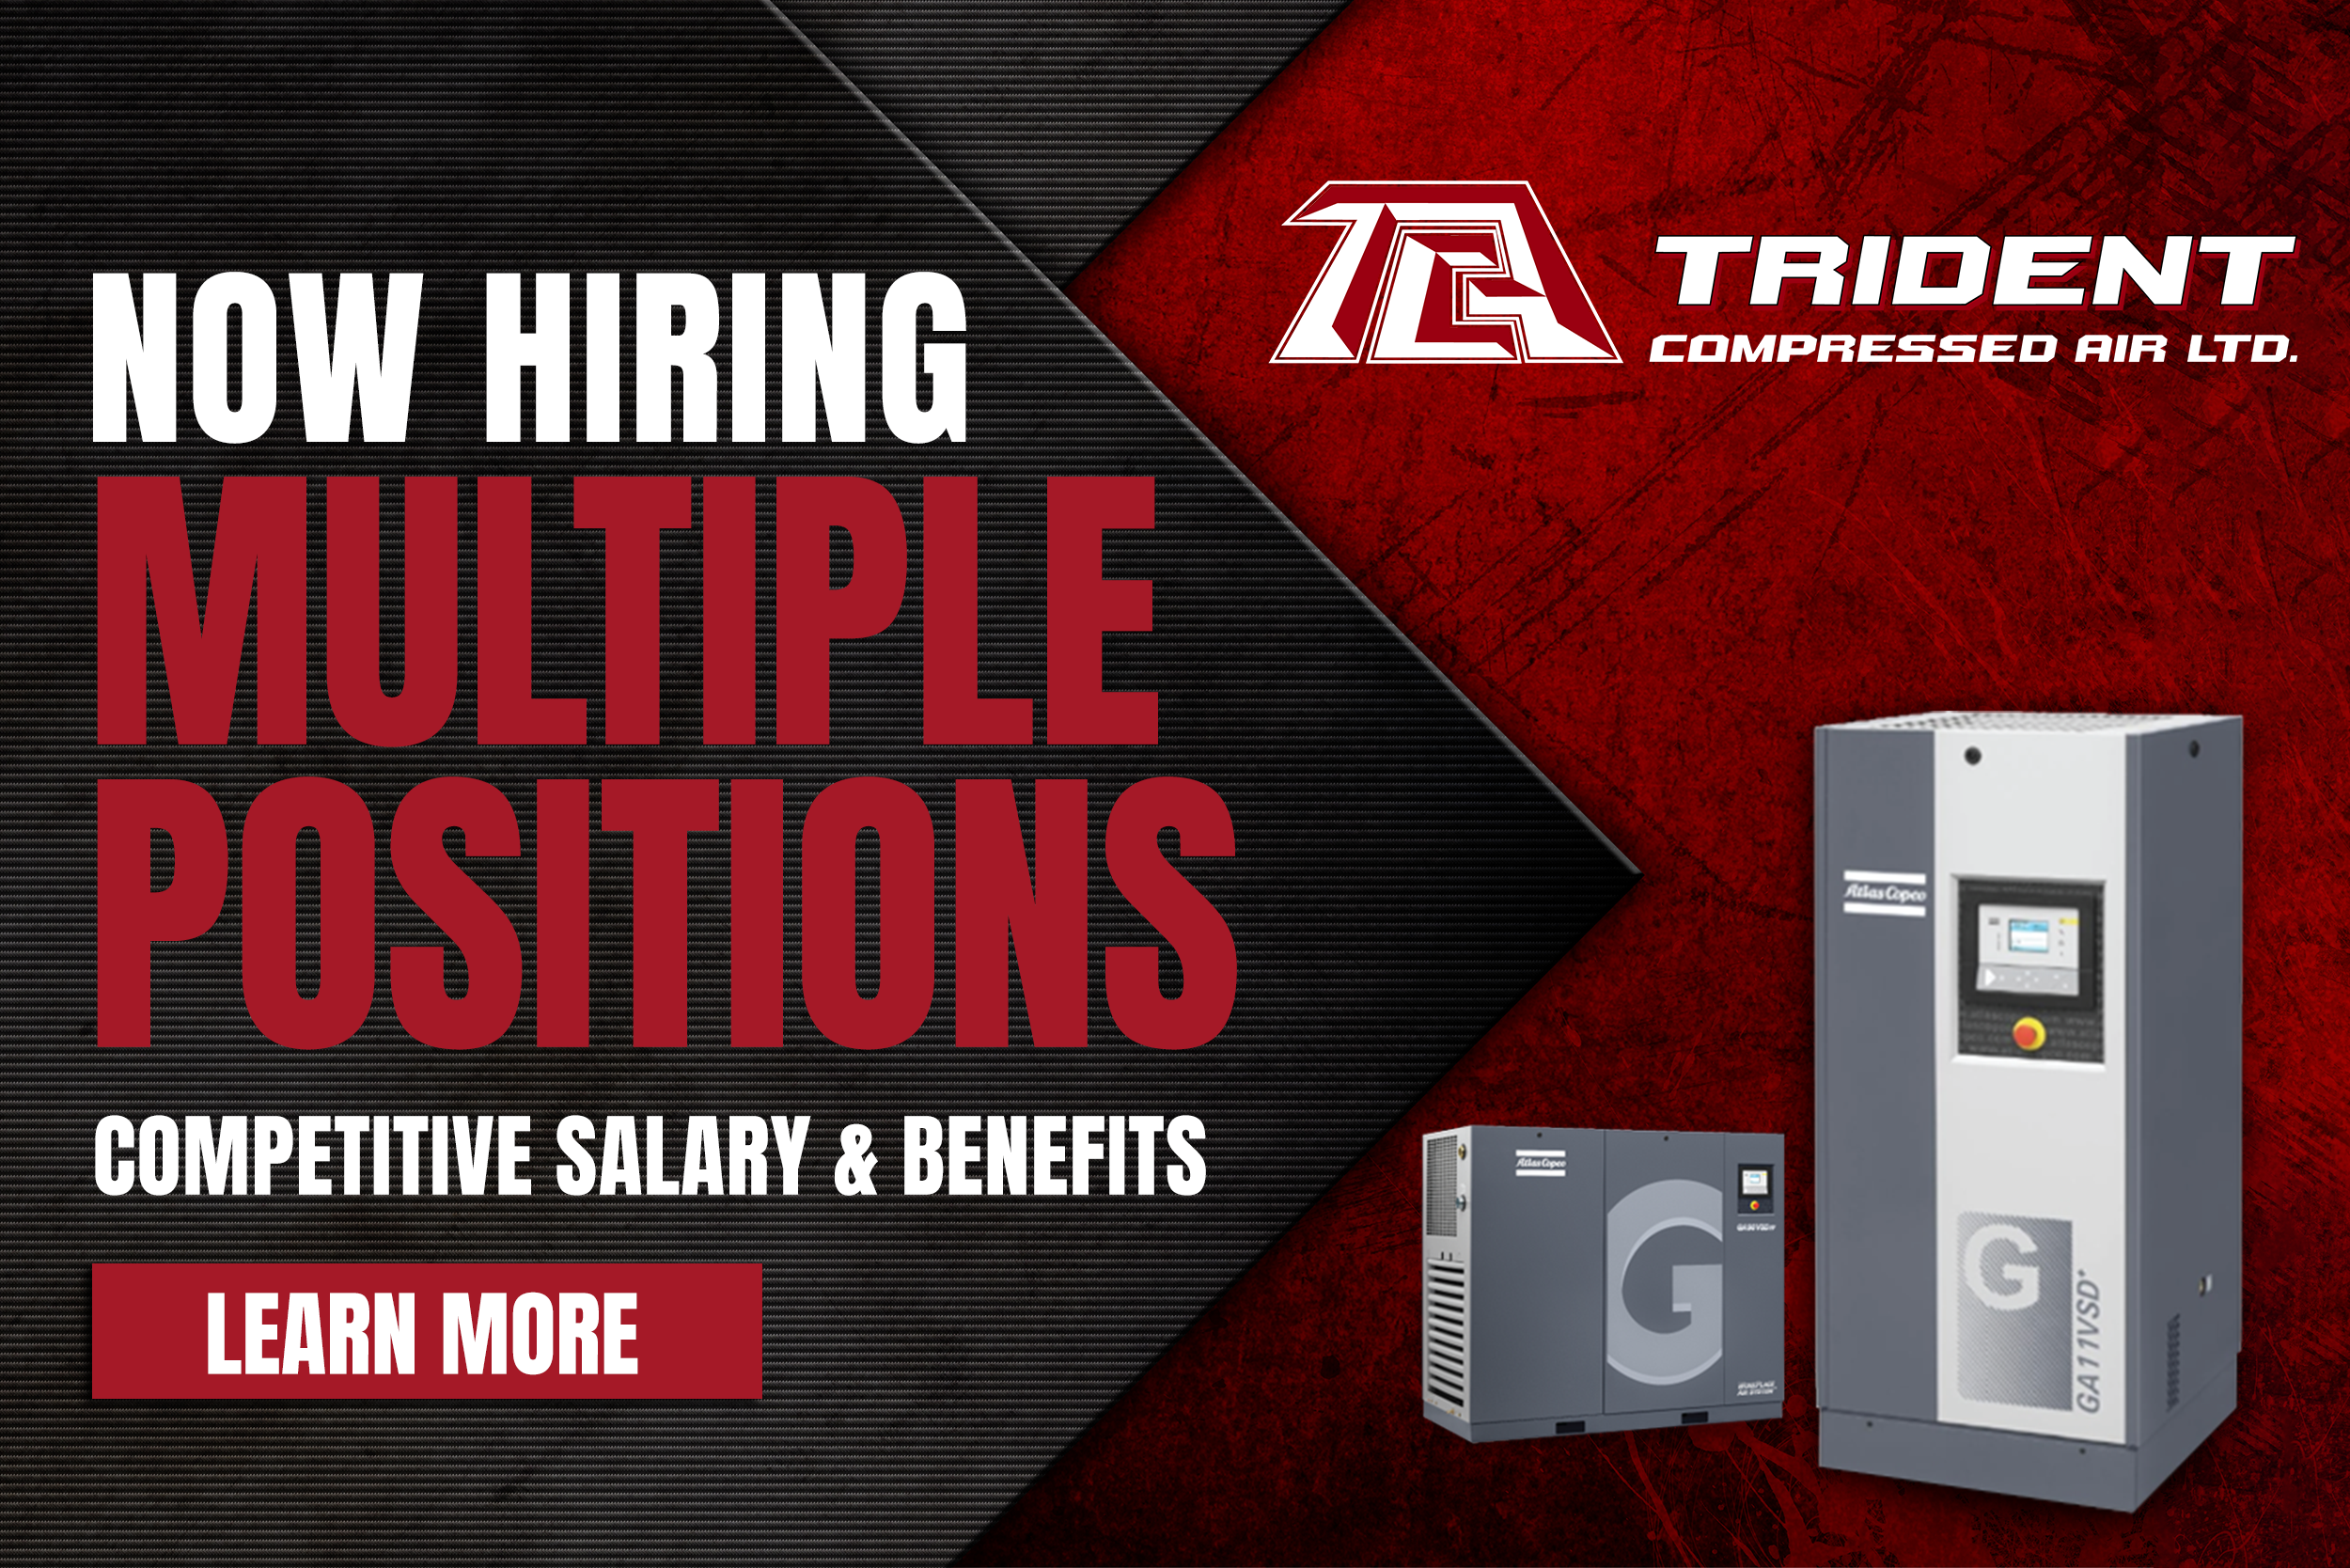 Trident - Now Hiring for Multiple Positions